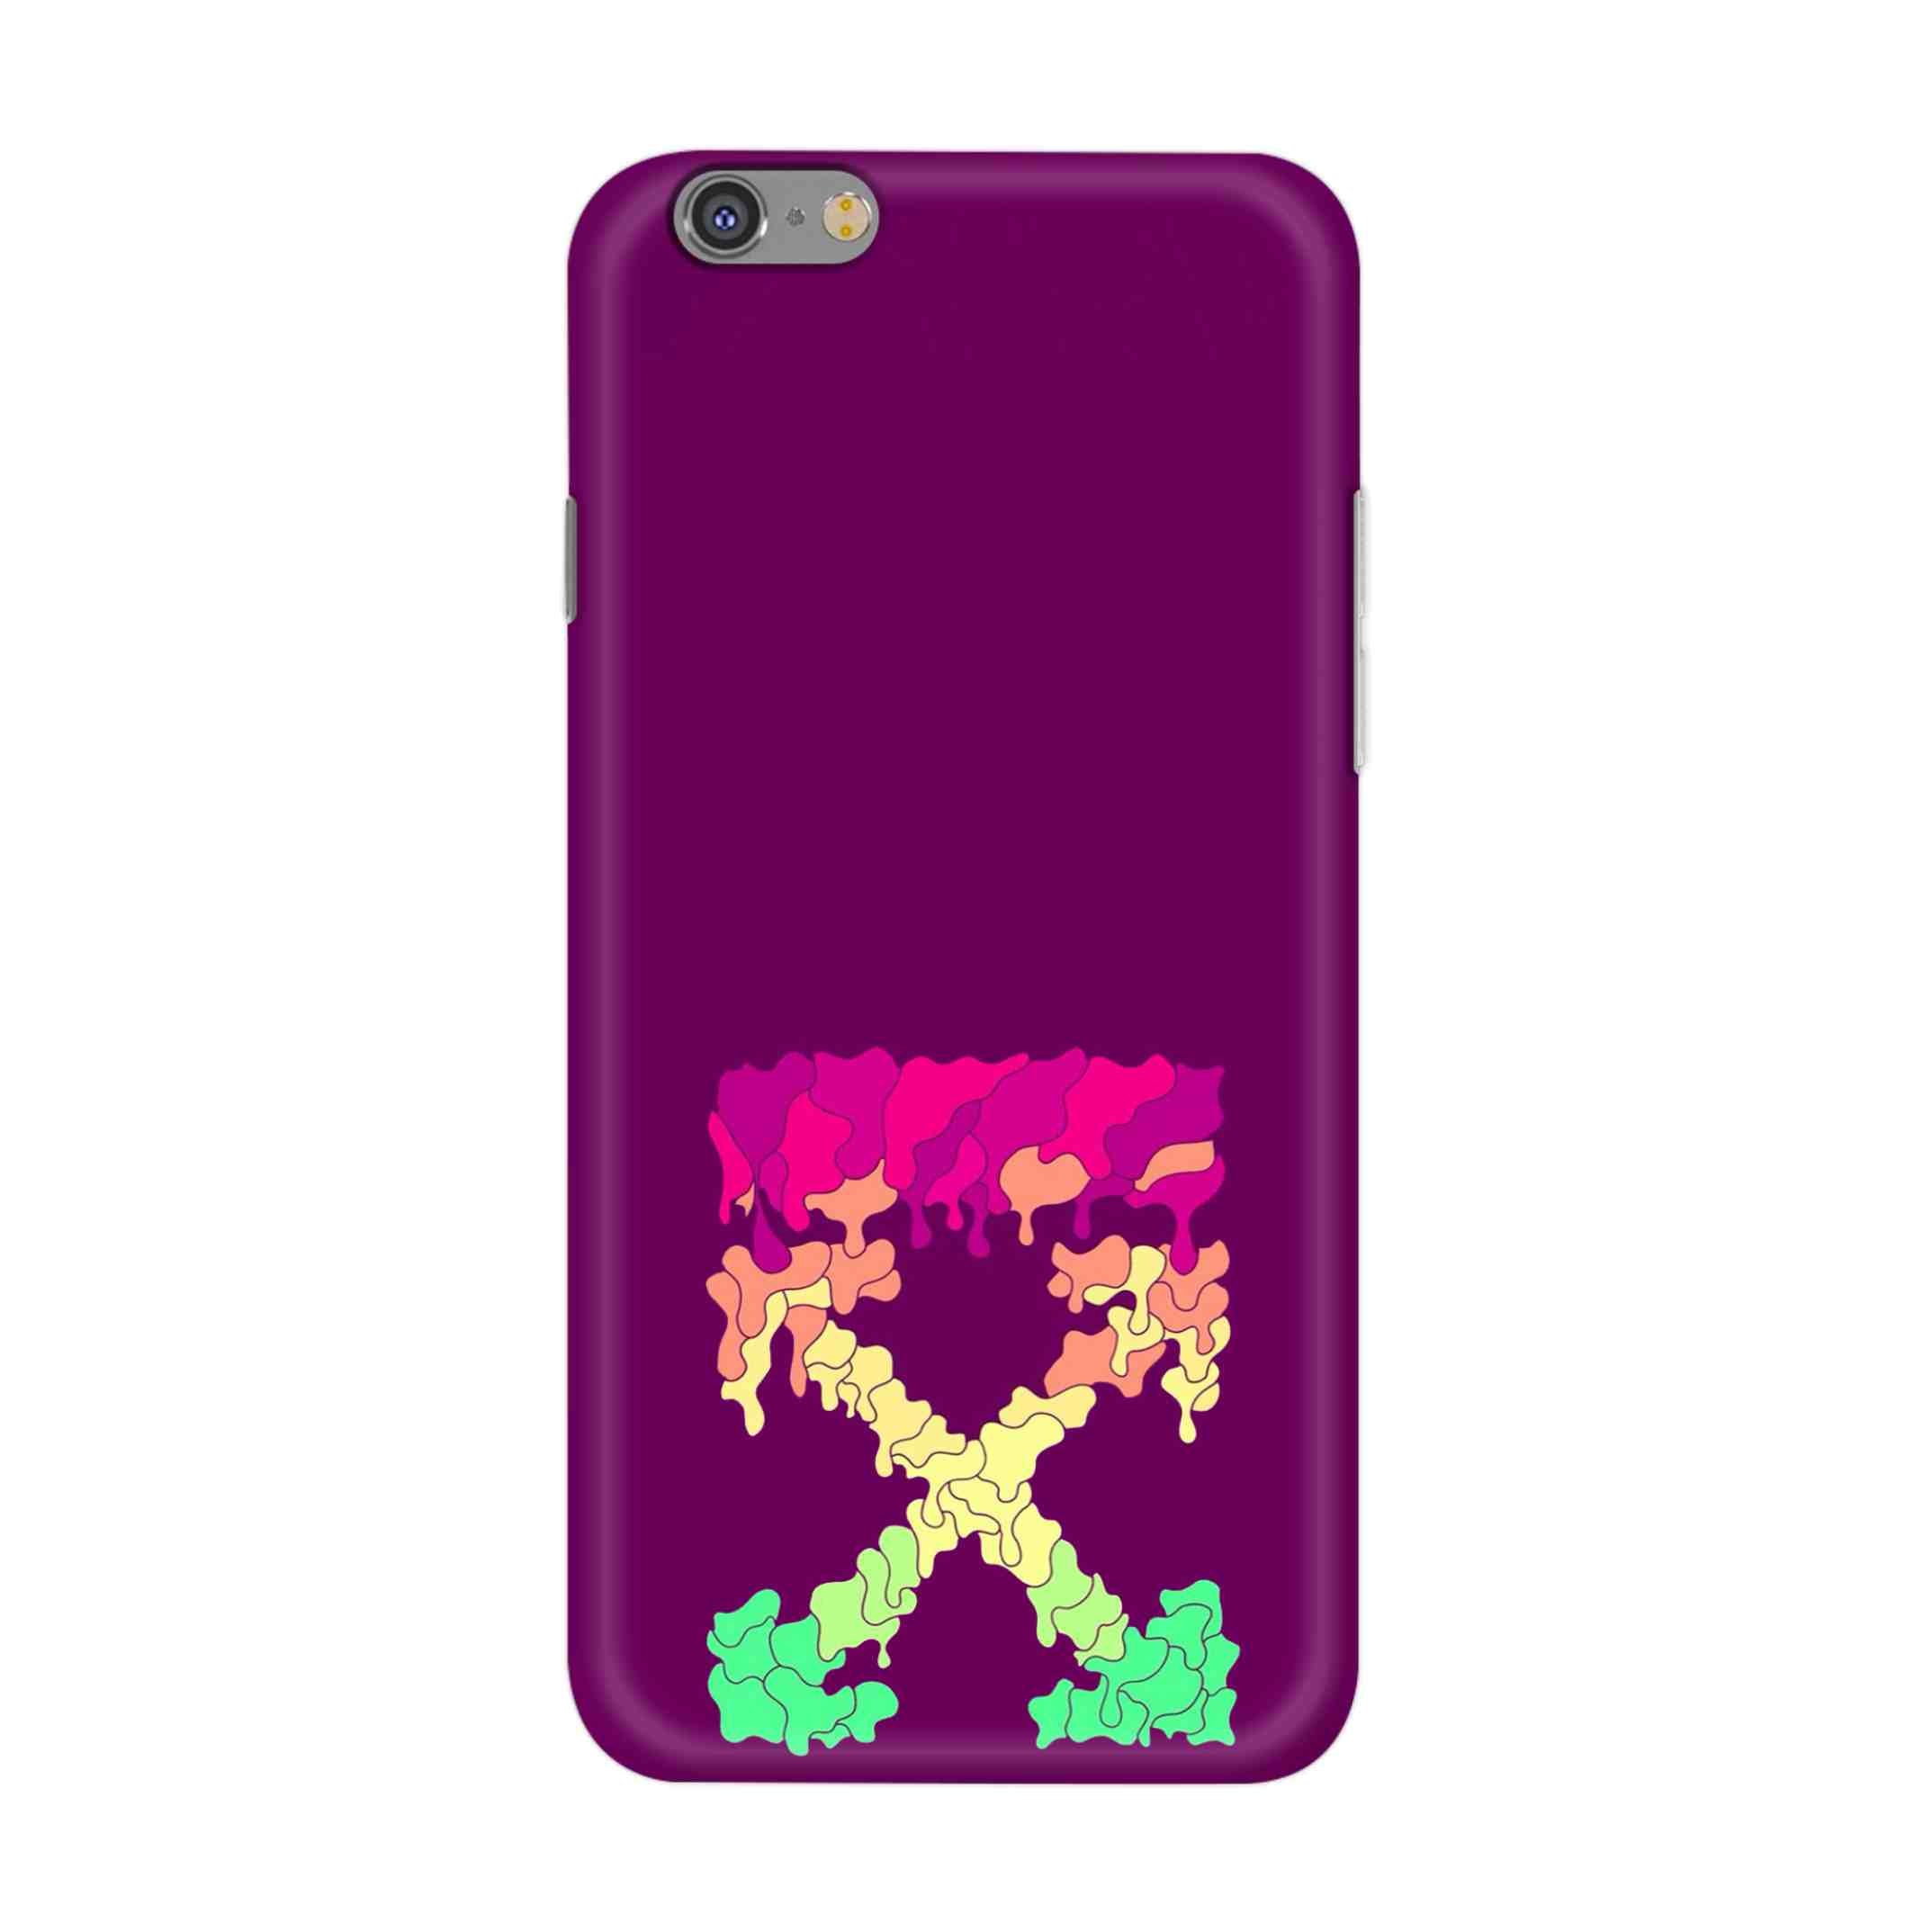 Buy X.O Hard Back Mobile Phone Case/Cover For iPhone 6 / 6s Online